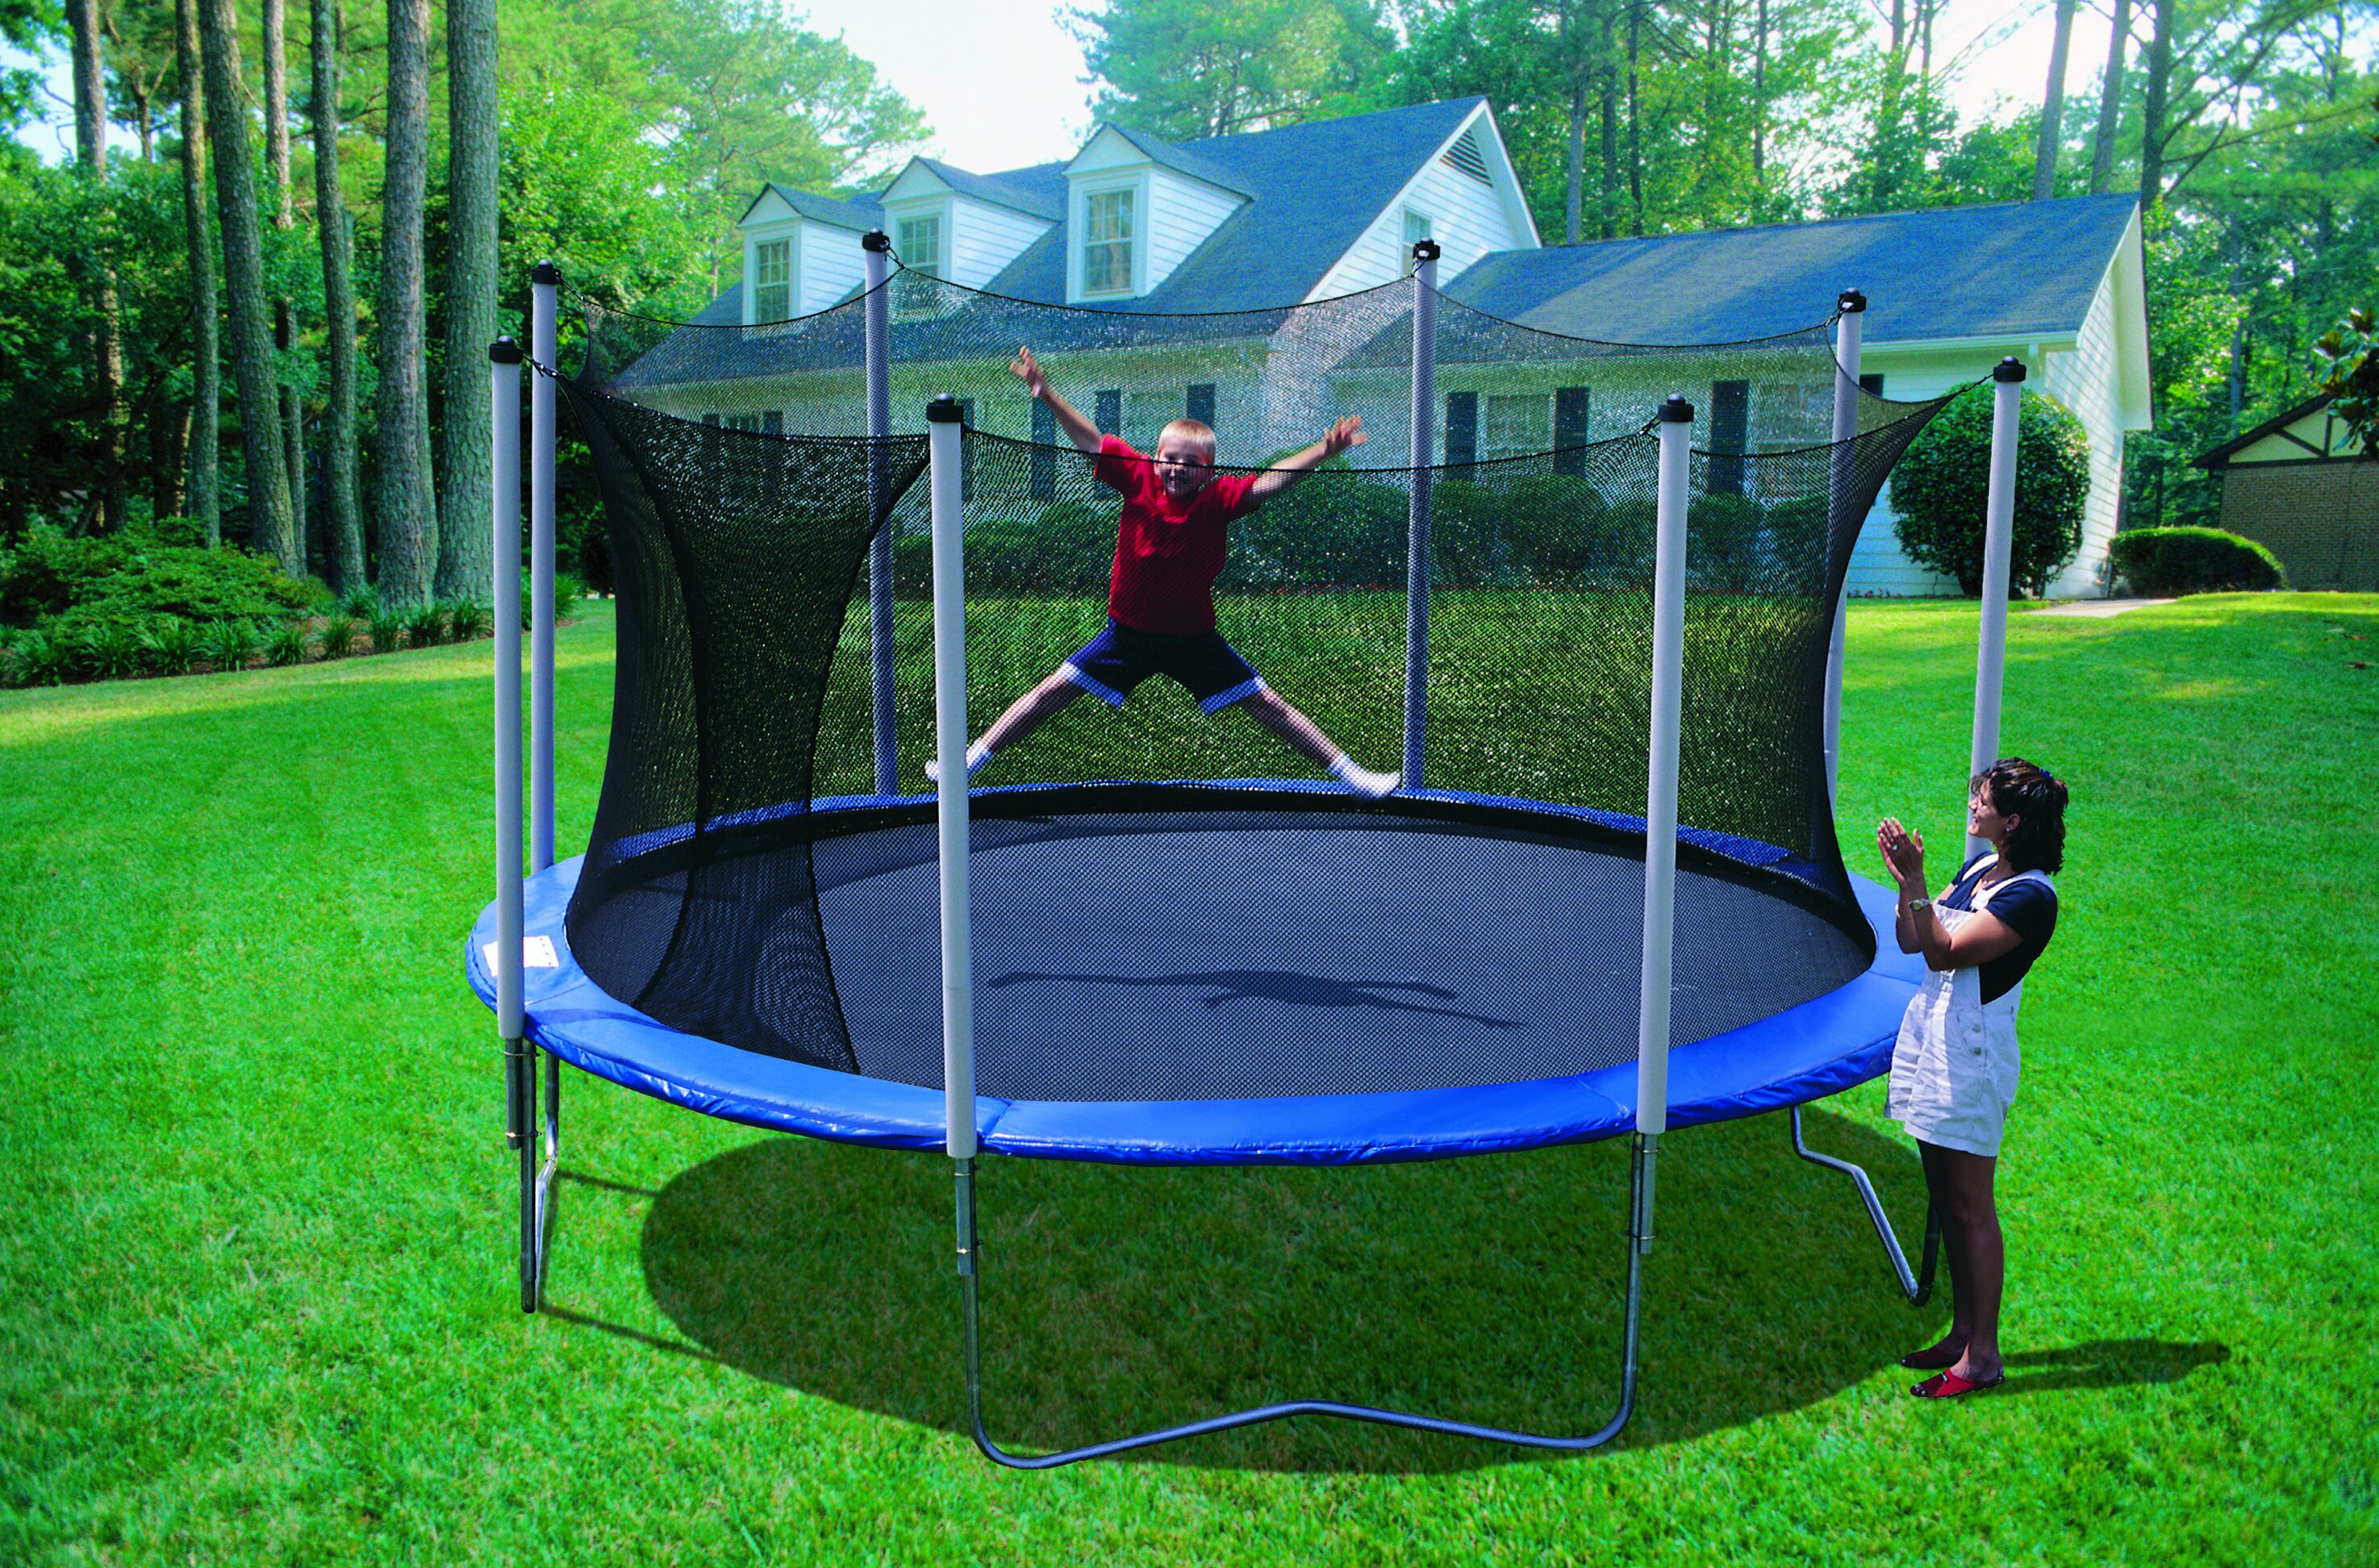 How Safe are Trampolines? | SiOWfa16: Science in Our World: Certainty